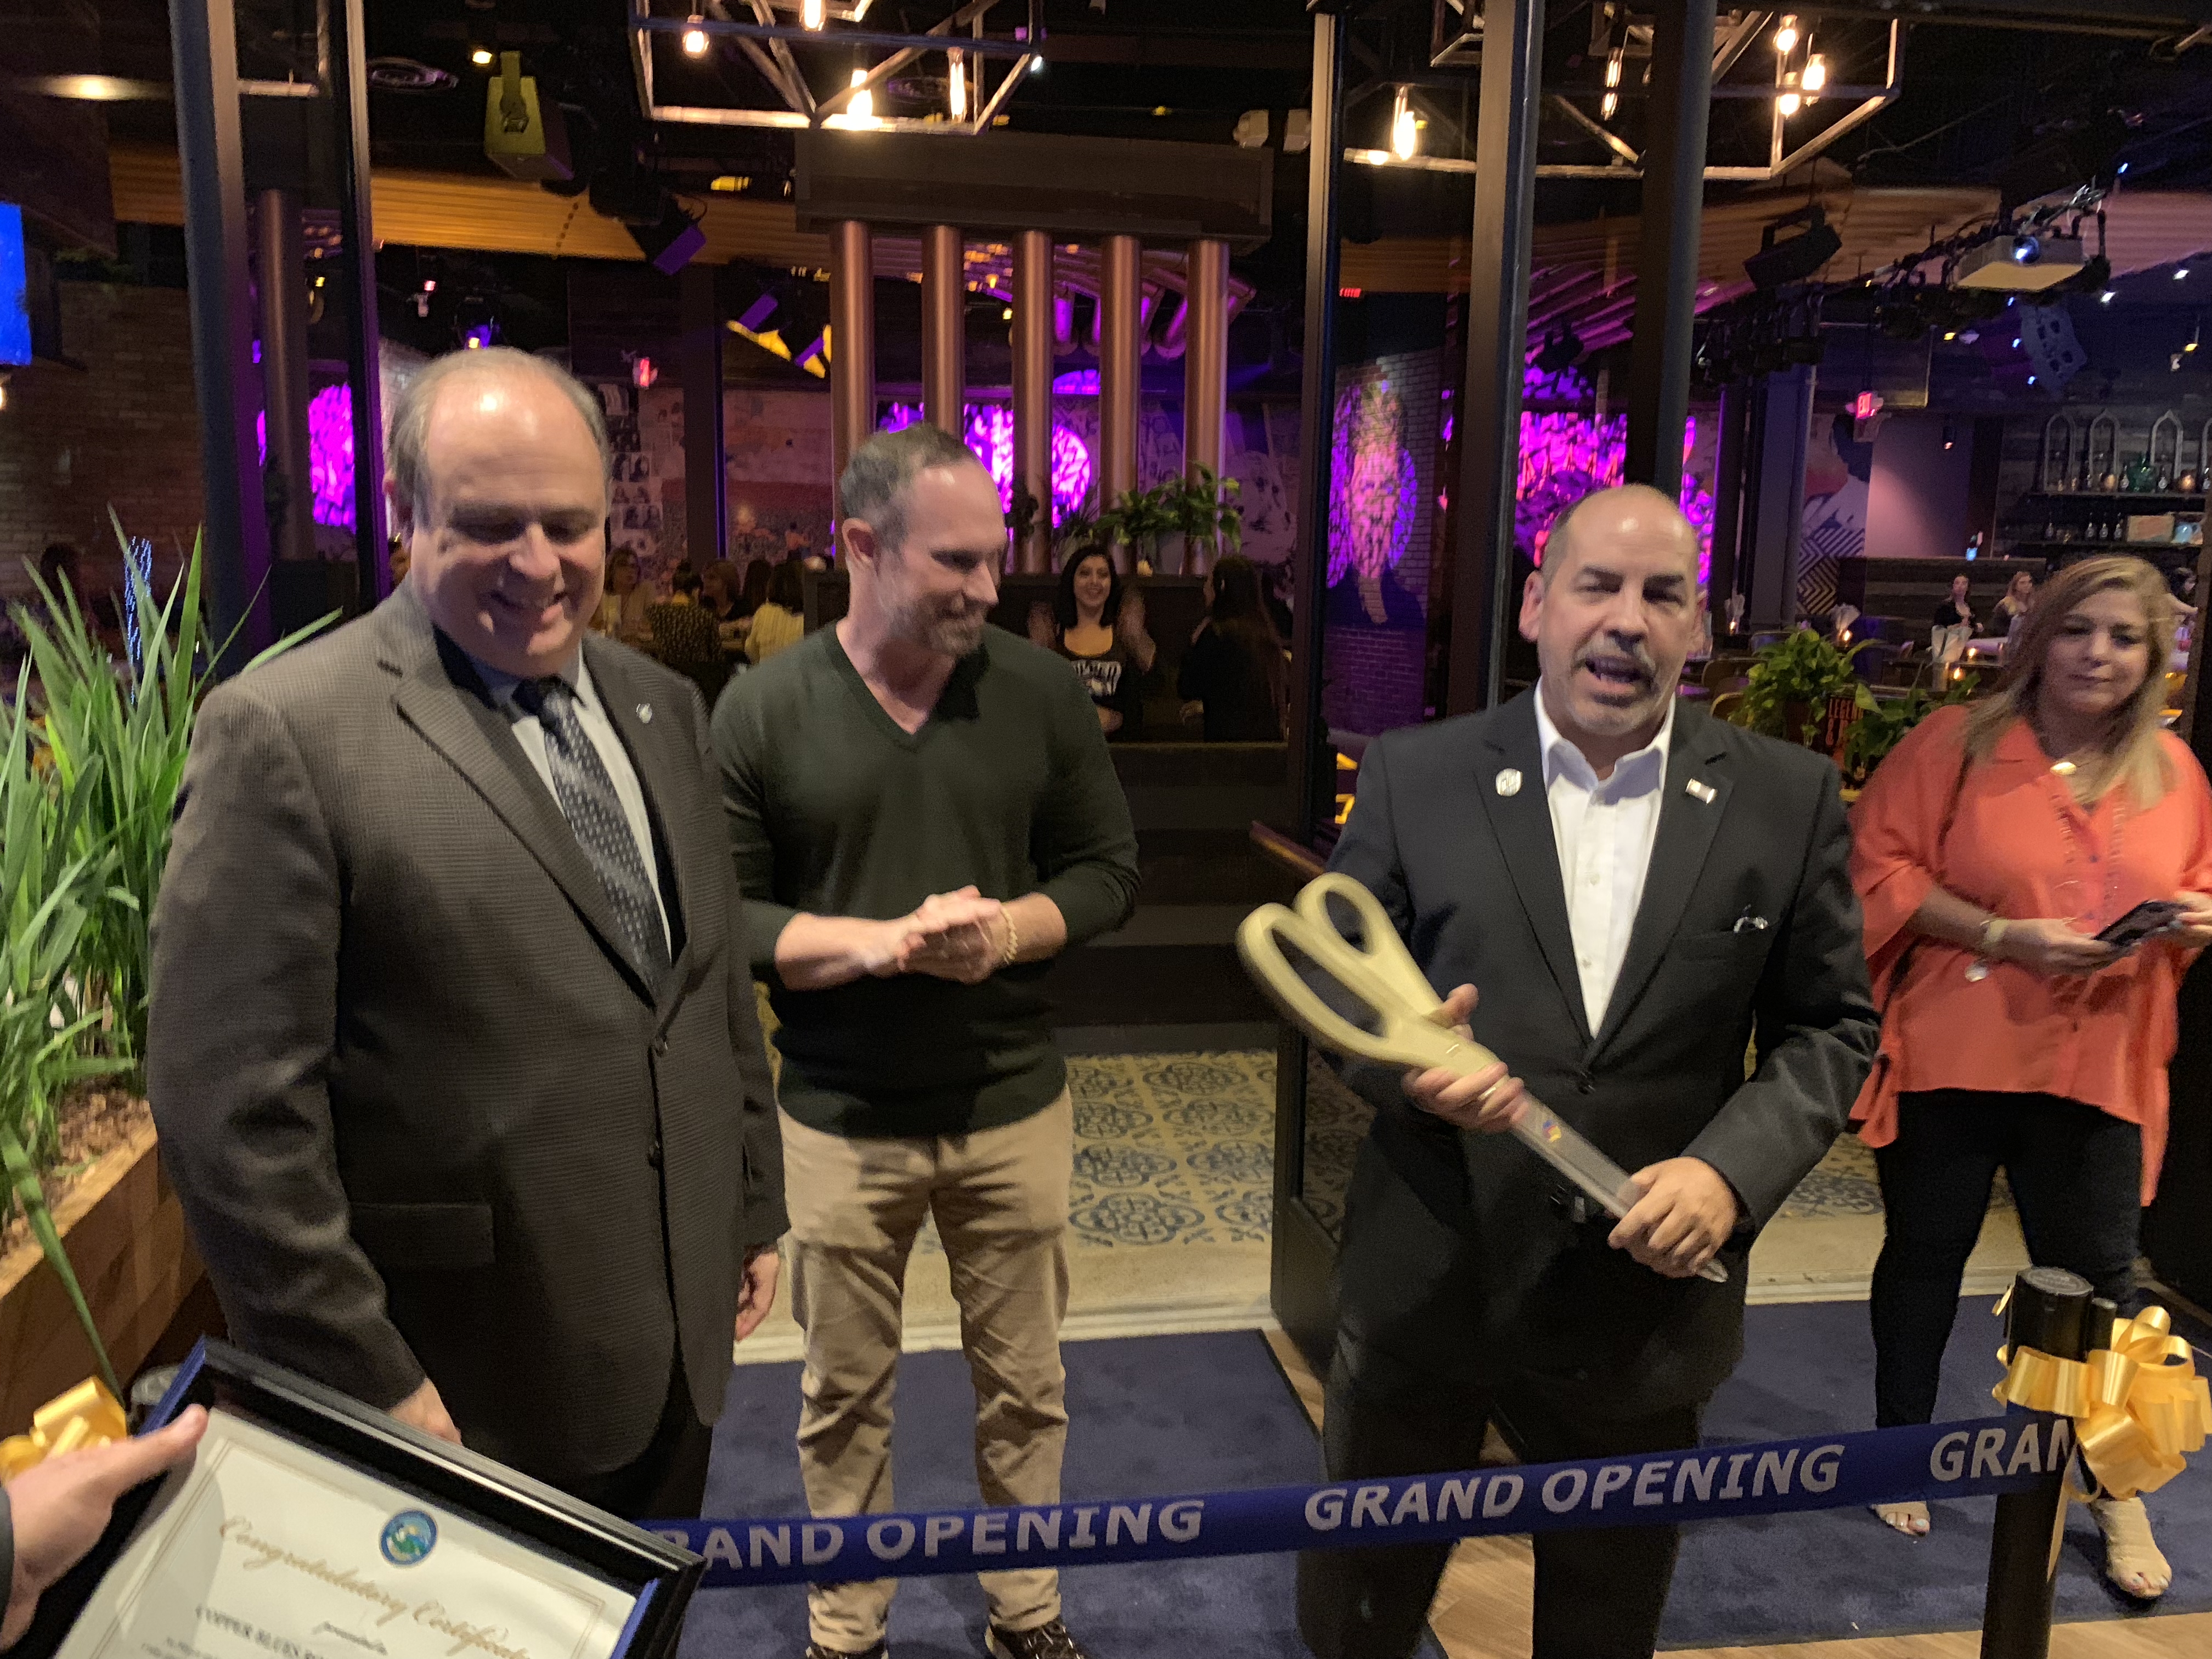 Ribbon Cutting with the Mayor hosted by the Doral Chamber of Commerce at Copper Blues Improv.